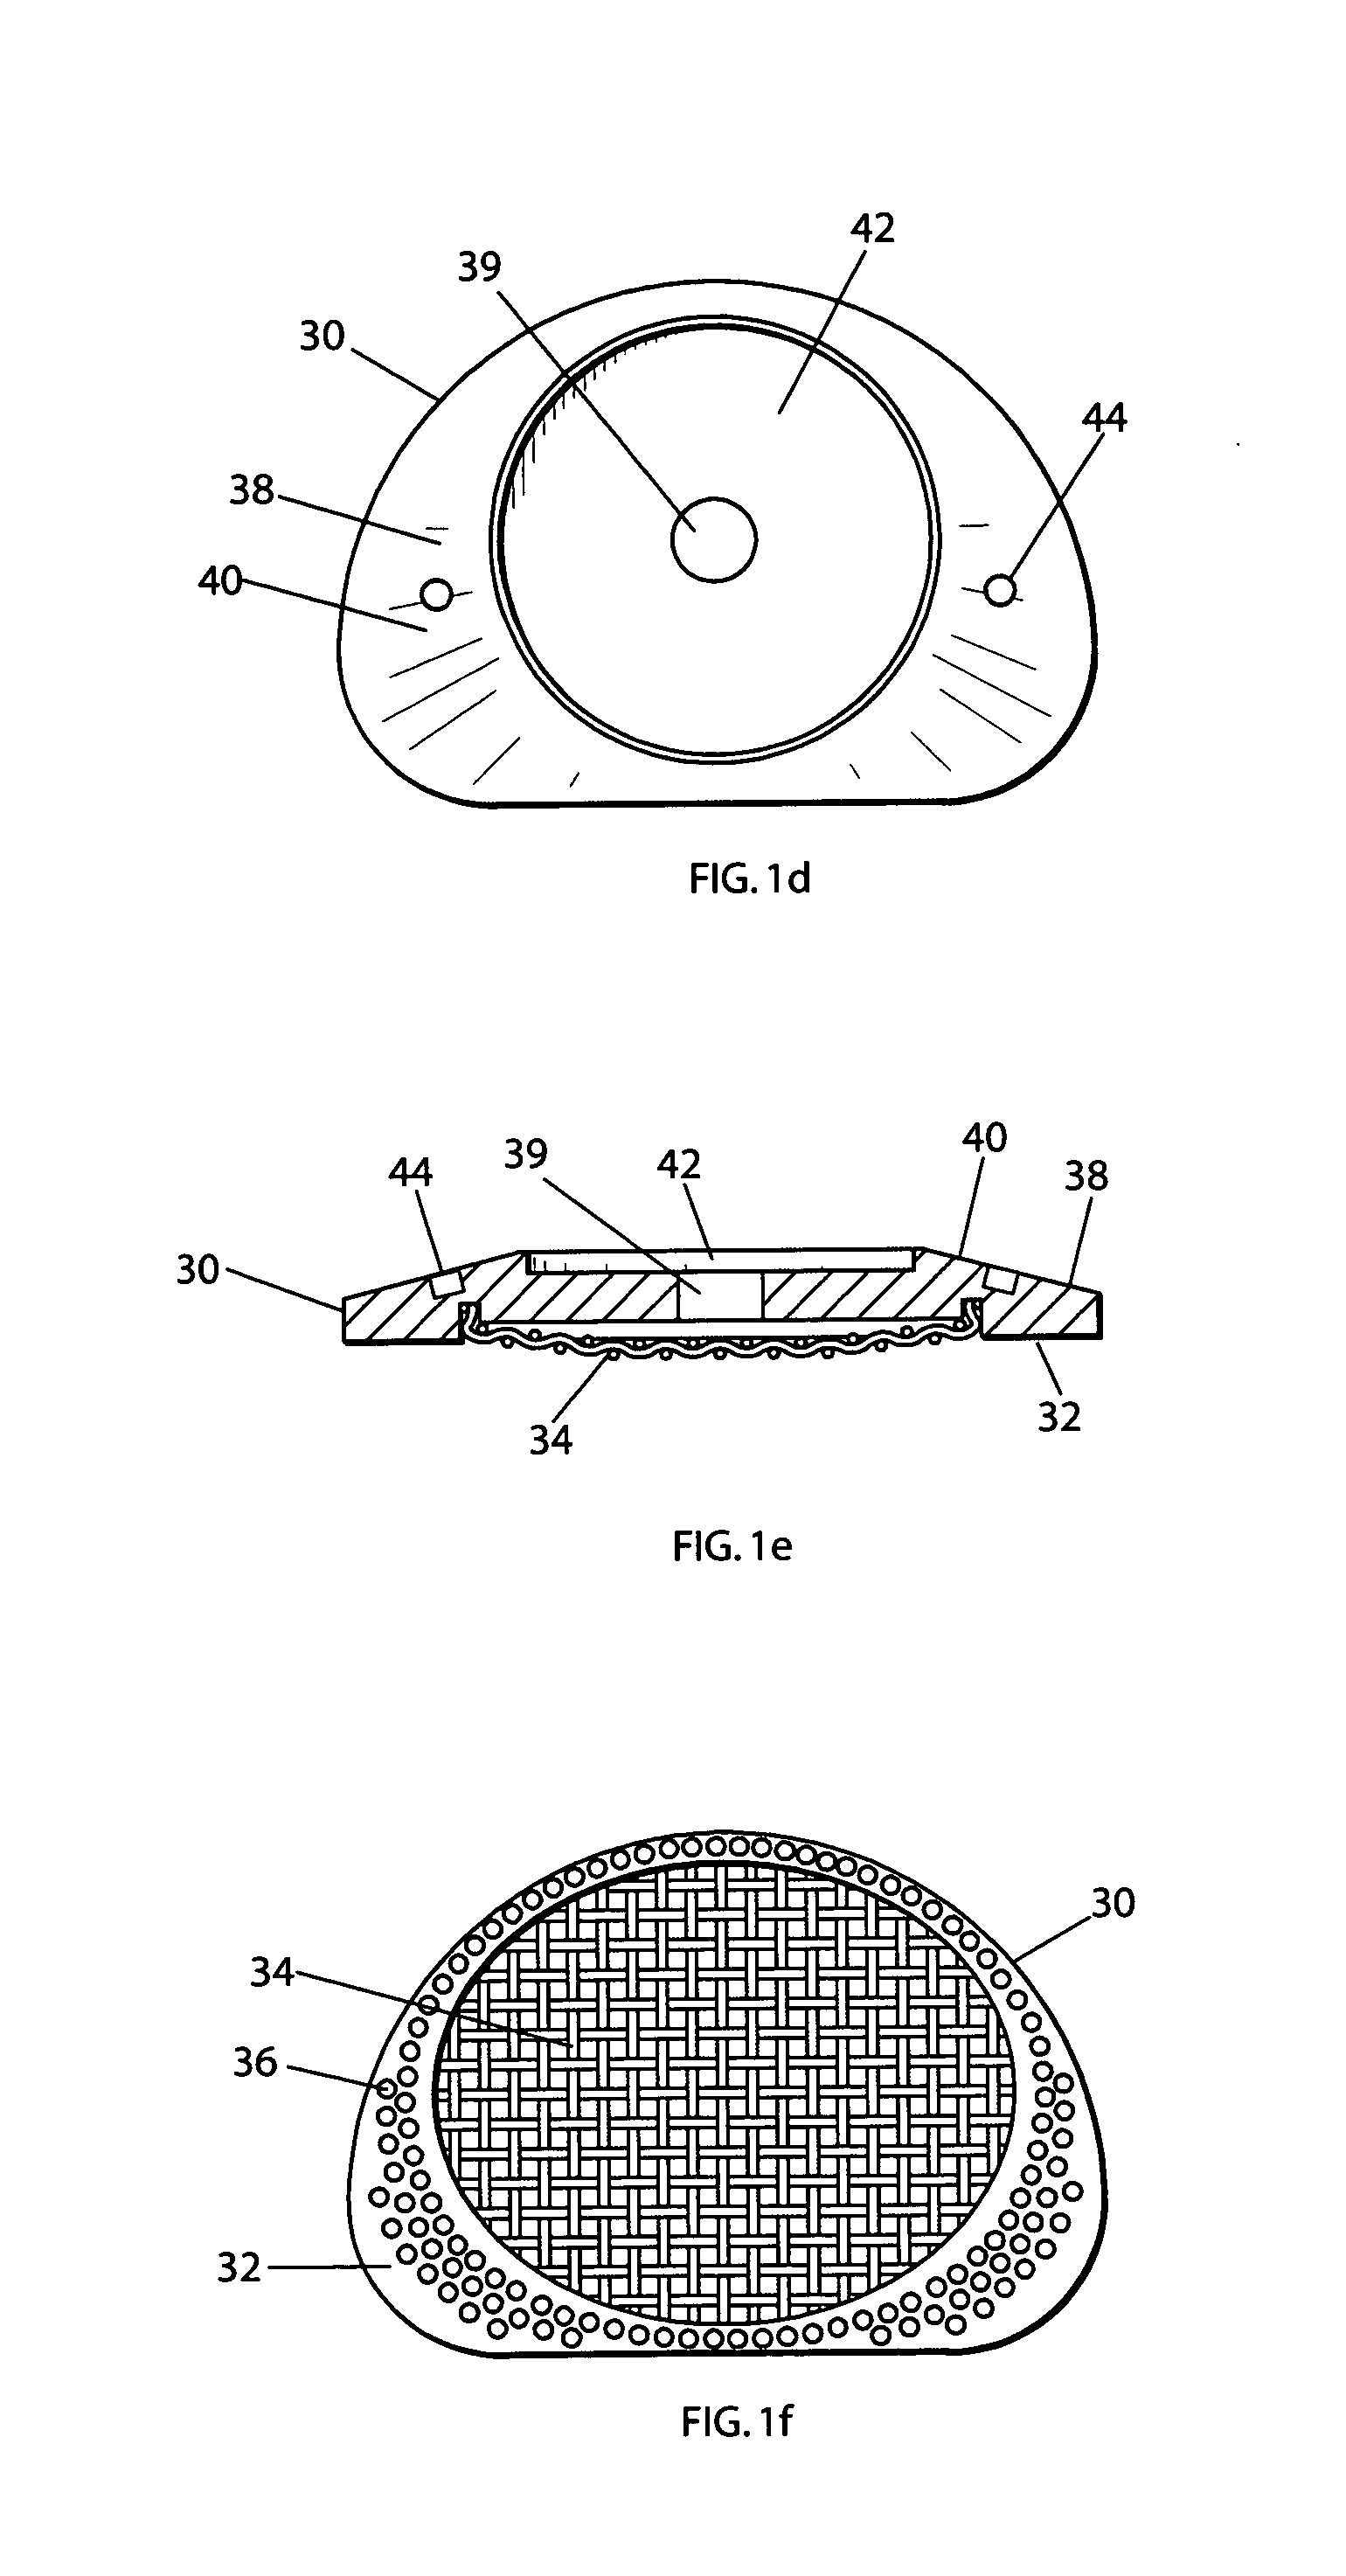 Axially compressible artificial intervertebral disc having limited rotation using a captured ball and socket joint with a solid ball and compression locking post